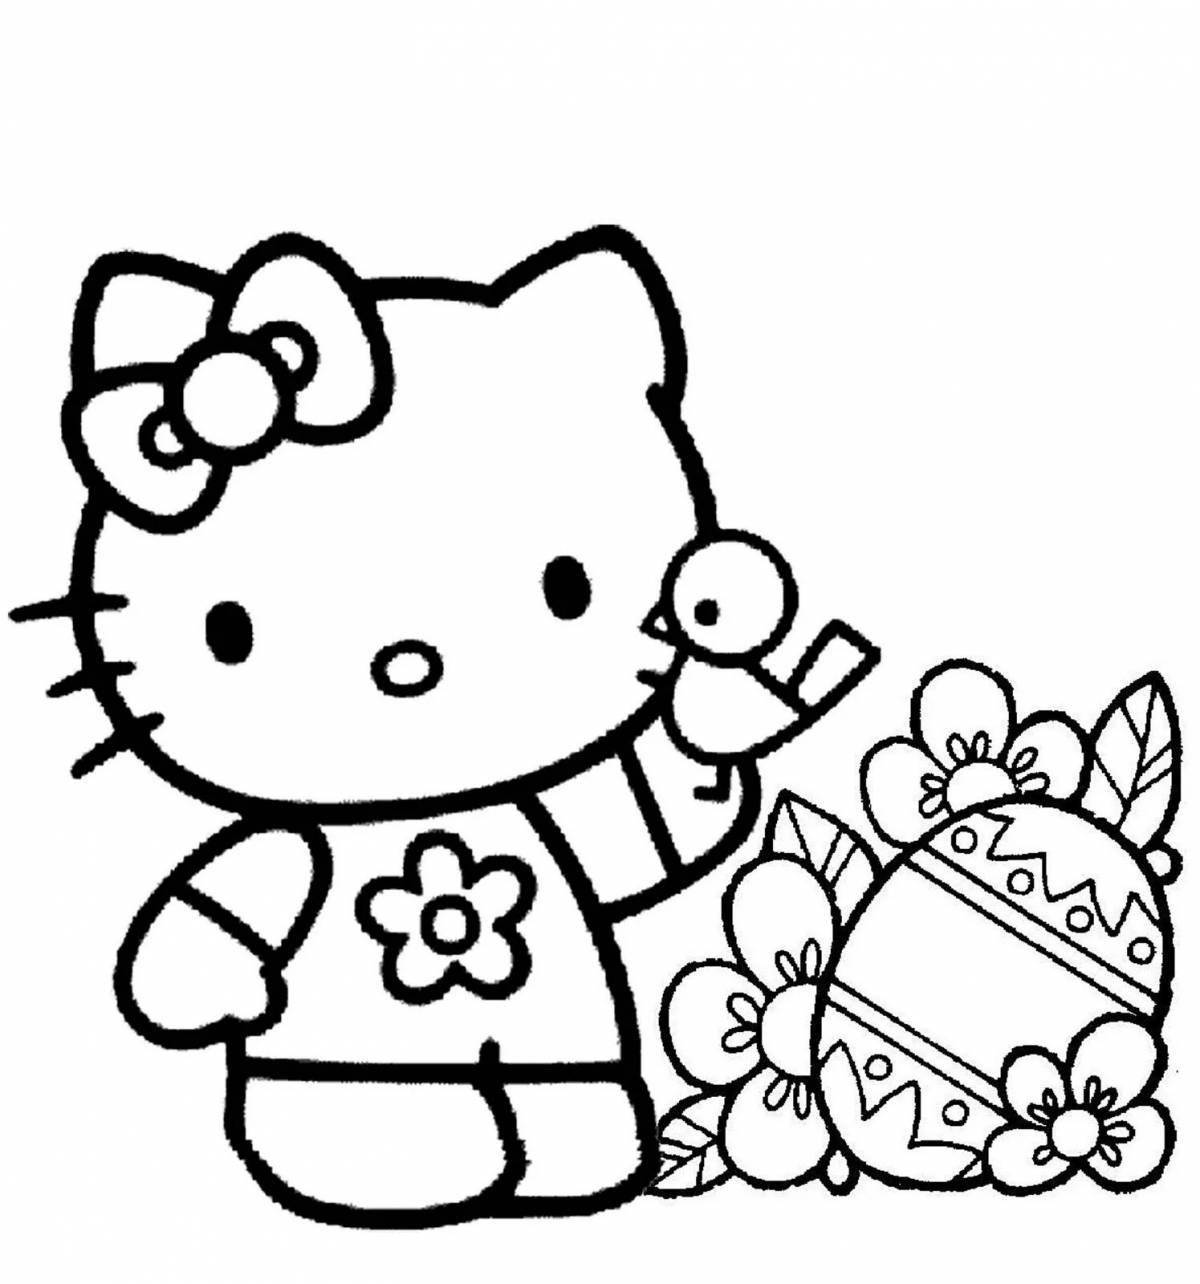 Animated chickens and hello kitty coloring book